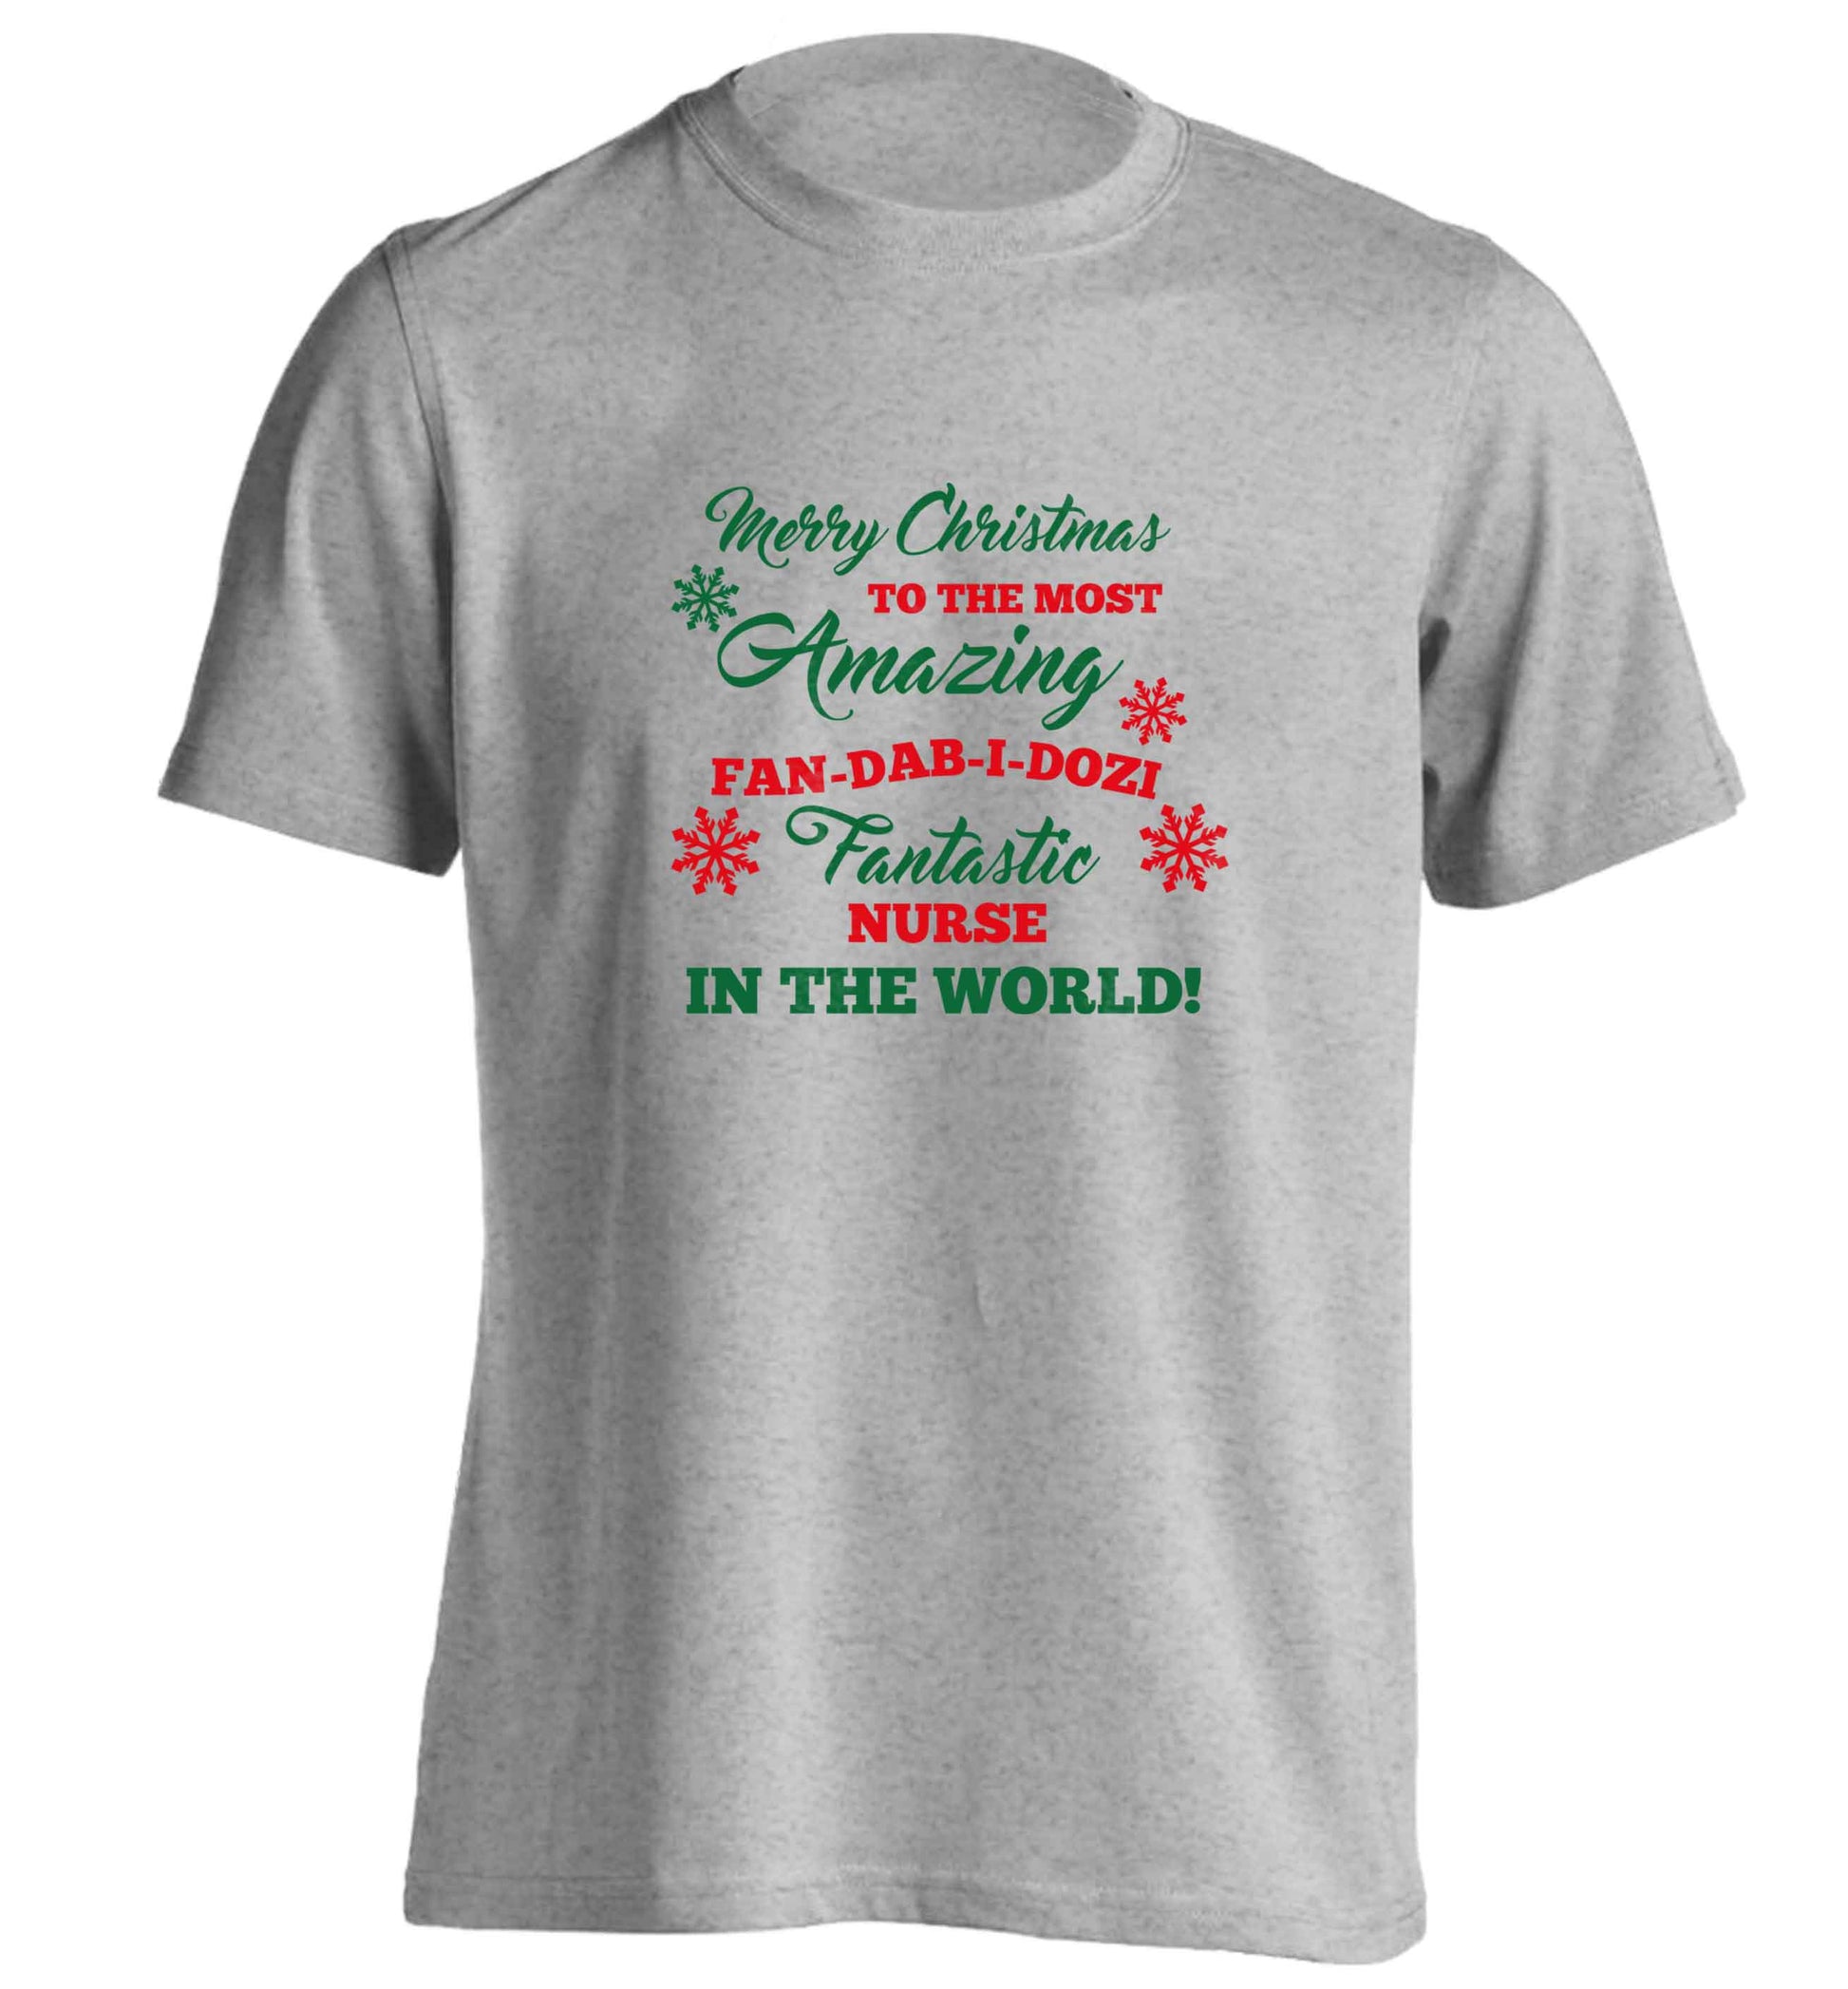 Merry Christmas to the most amazing nurse in the world! adults unisex grey Tshirt 2XL